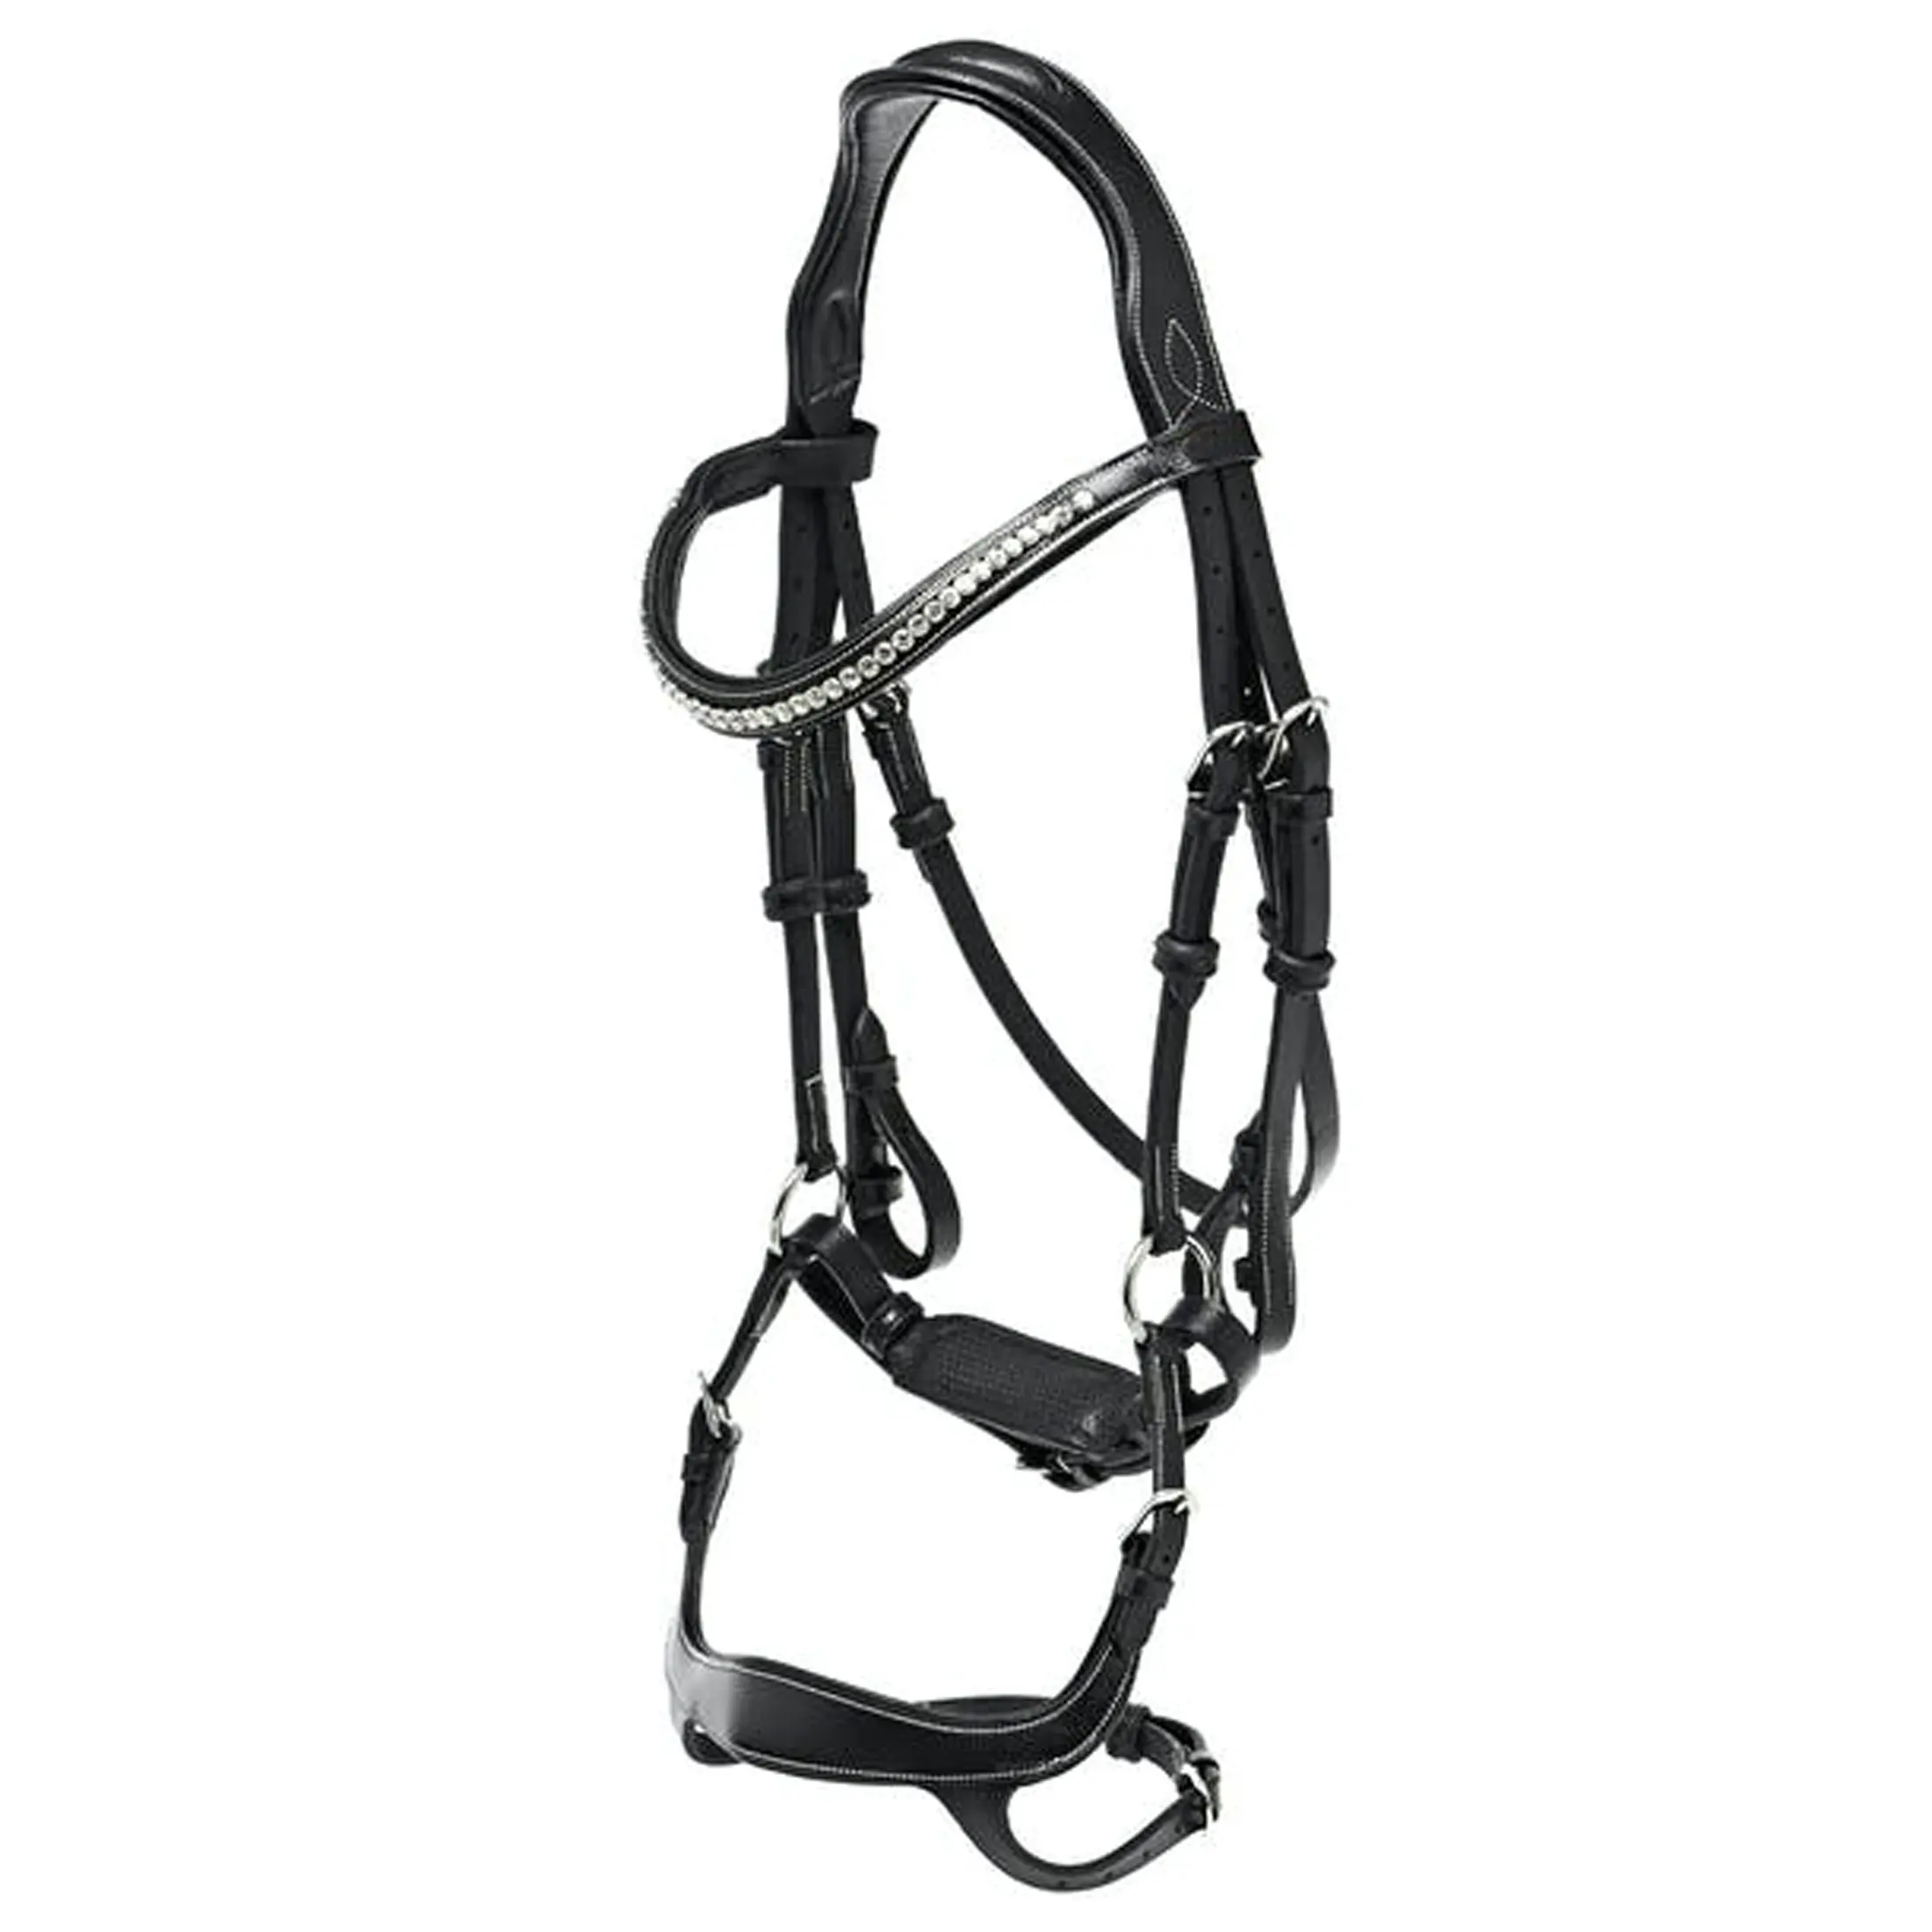 High Quality English Leather Anatomic Perforated Snaffle Bridle Decorated Beautiful Crystals Swarovski Show Horse Equipment